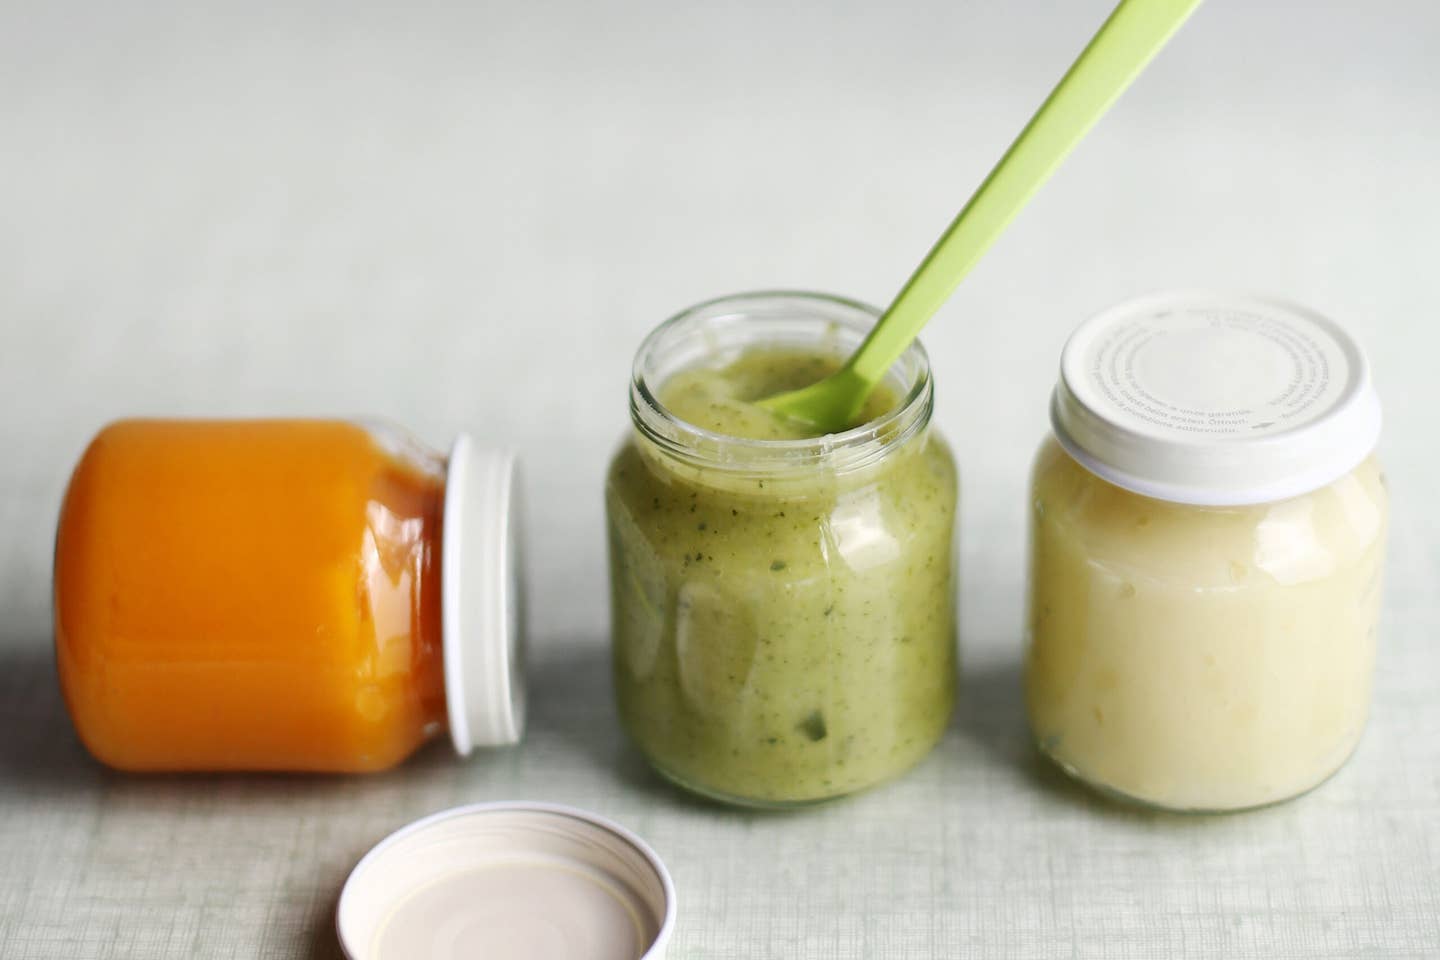 The Best Baby Food Makers Make Life Easier